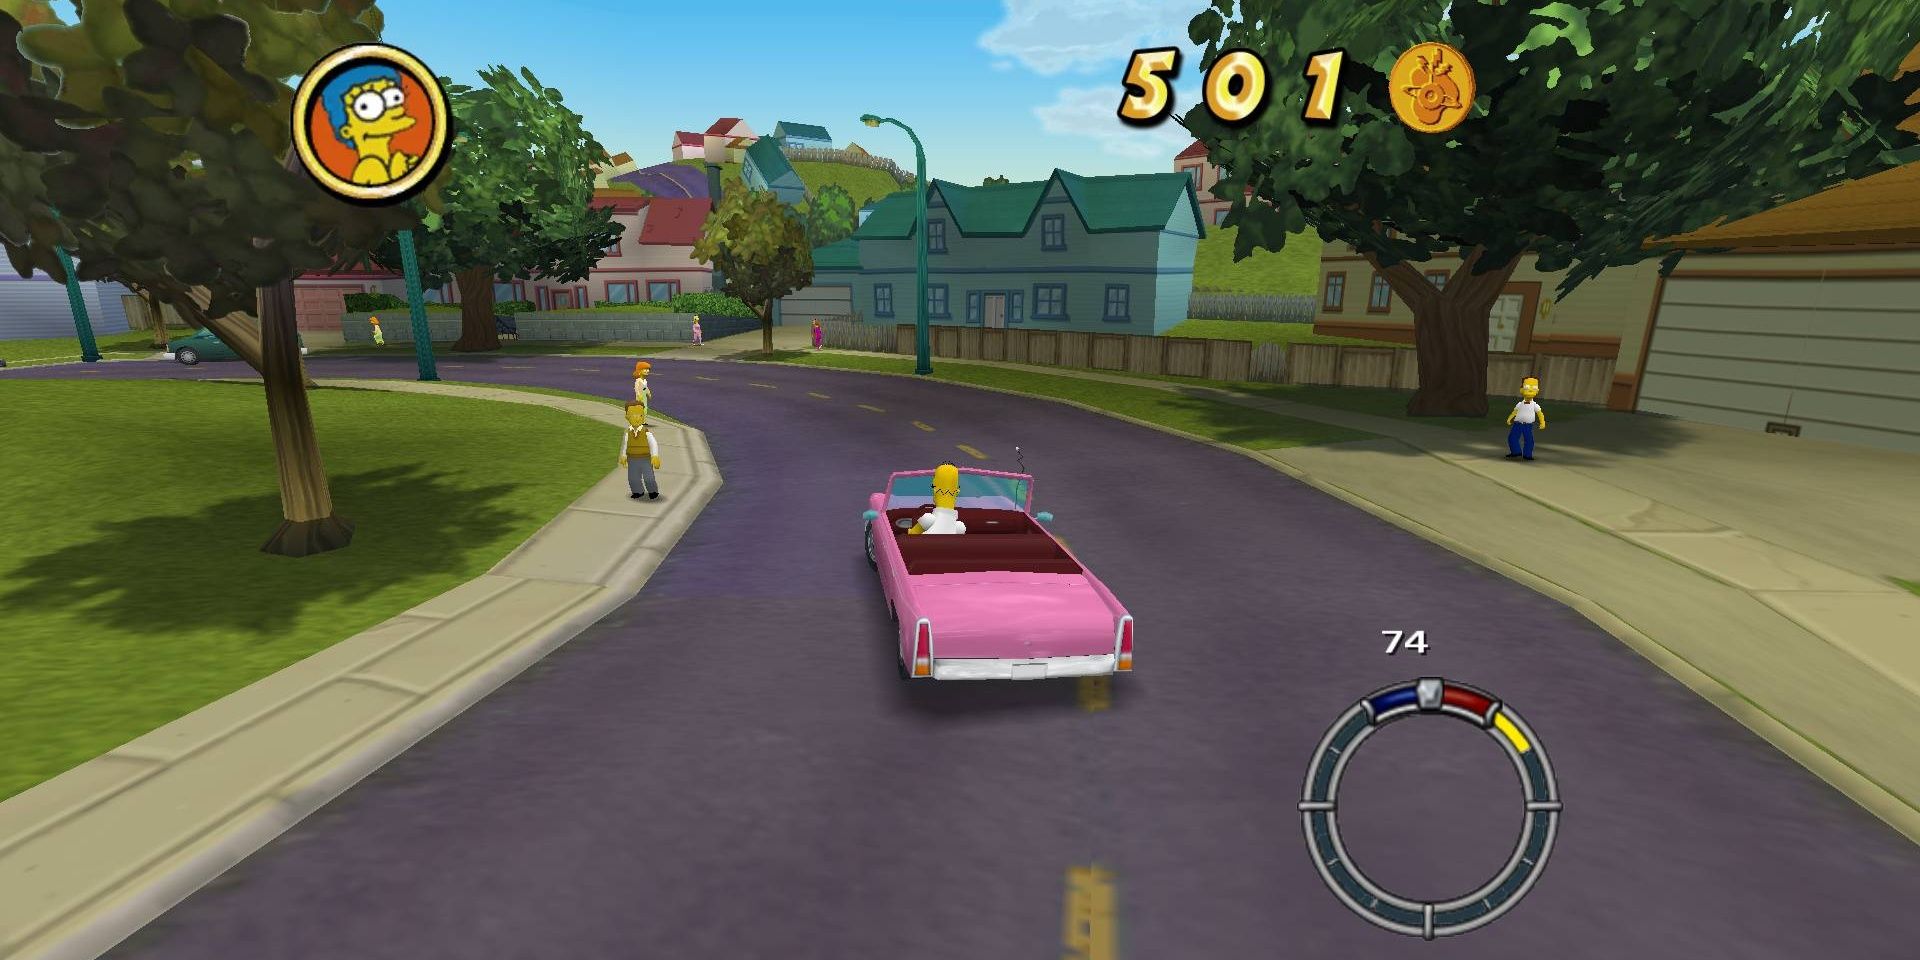 A screenshot showing gameplay in The Simpsons: Hit and Run